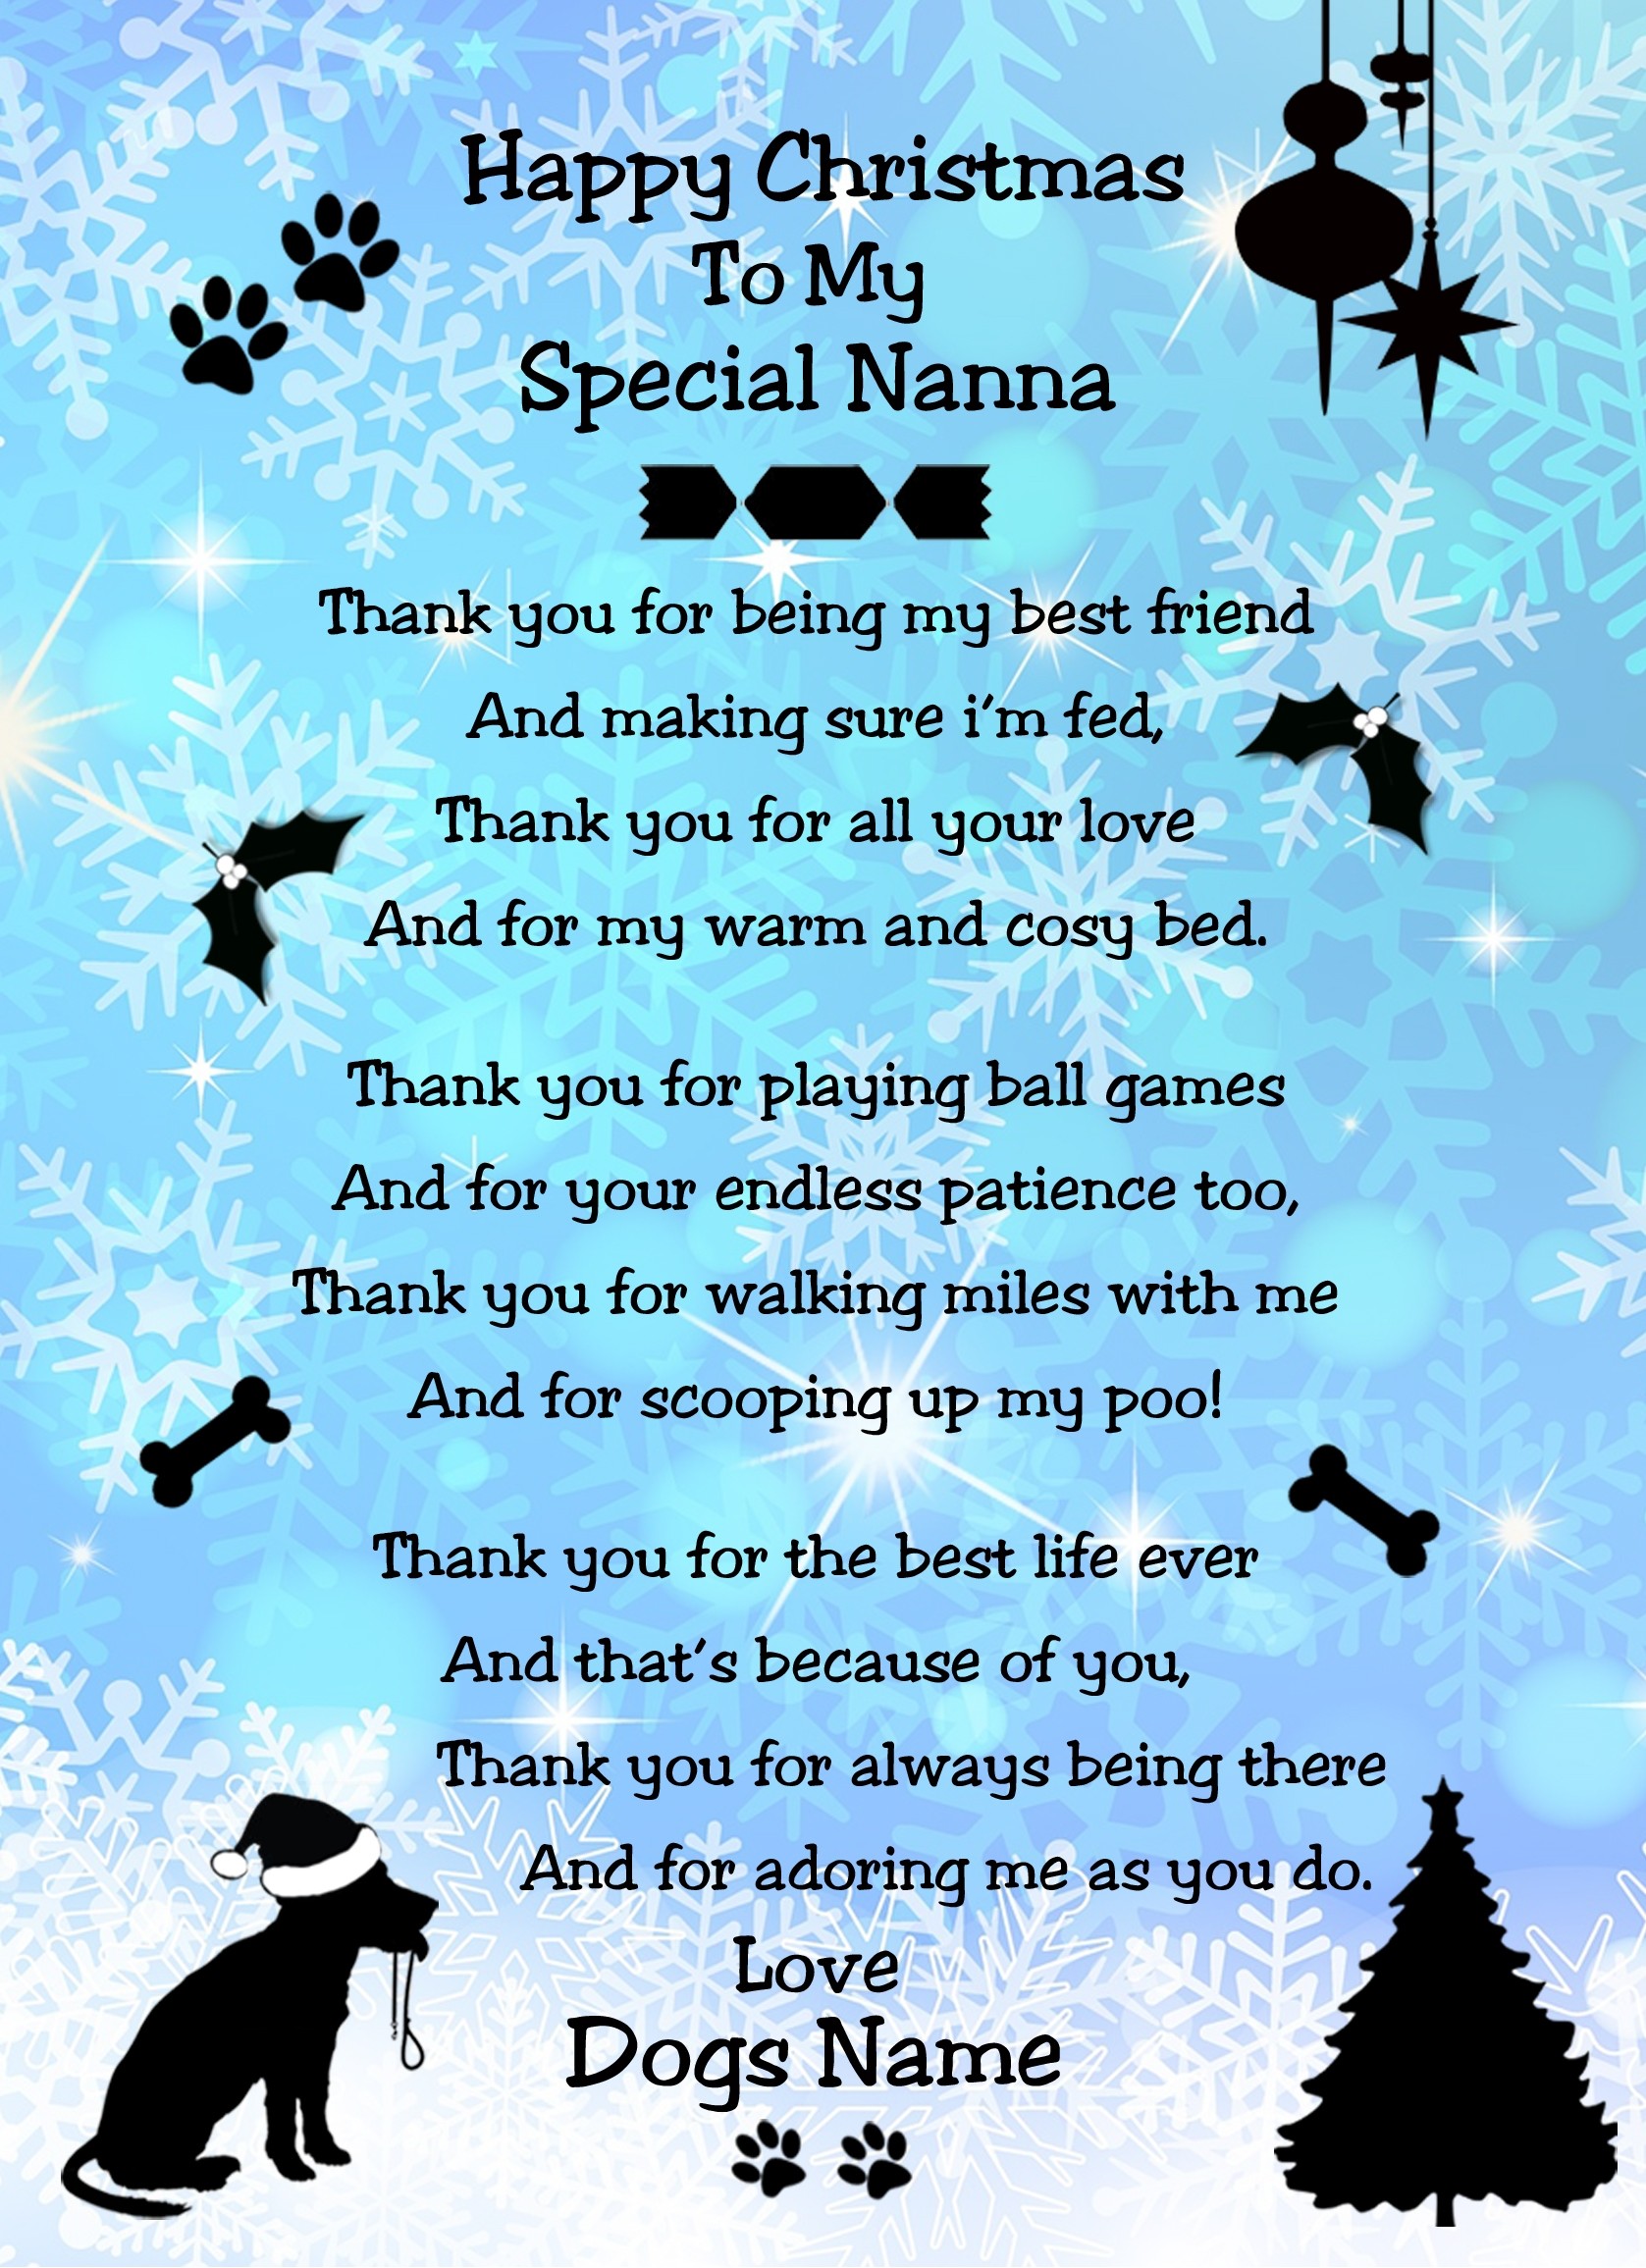 Personalised From The Dog Verse Poem Christmas Card (Special Nanna, Snowflake, Happy Christmas)